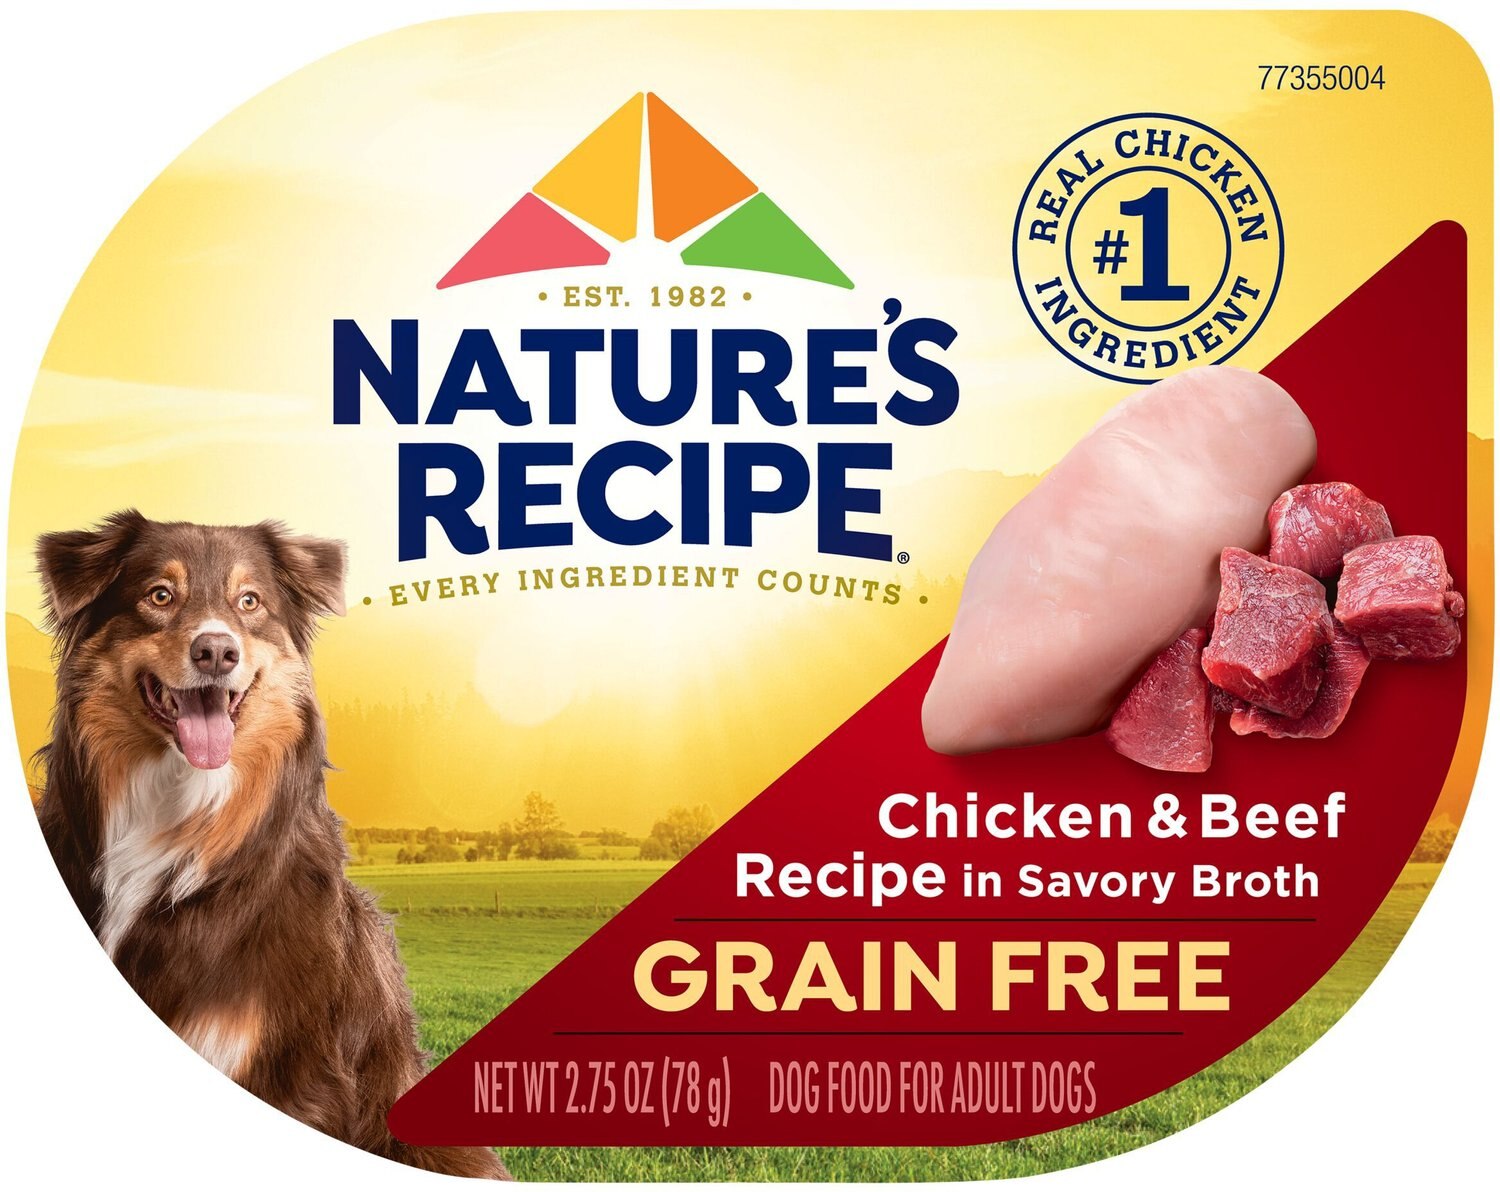 Nature's Recipe Prime Blends Chicken & Beef